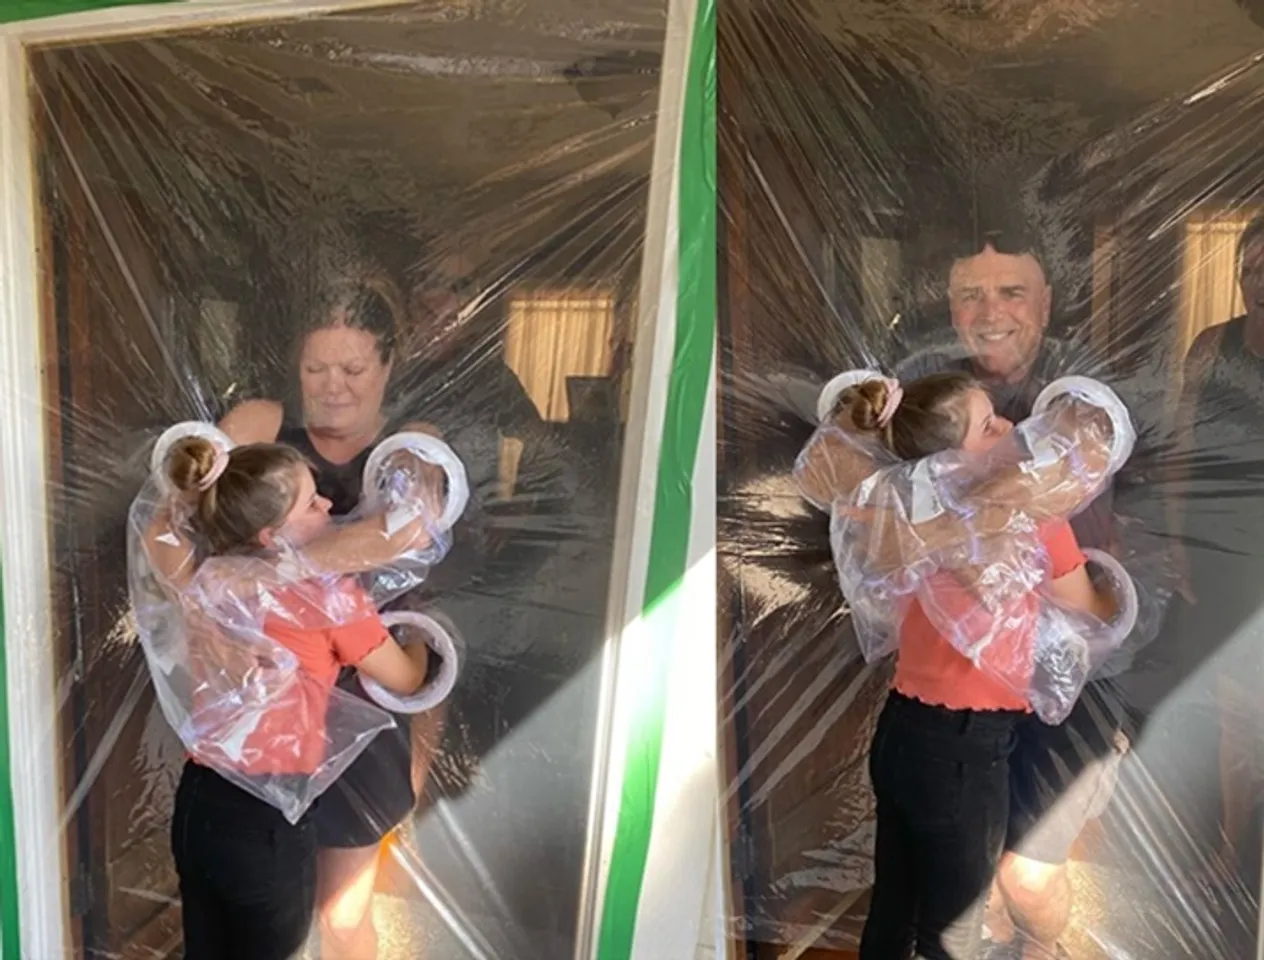 Trending viral video of 10-year-old makes ‘hug curtain’ to embrace grandparents